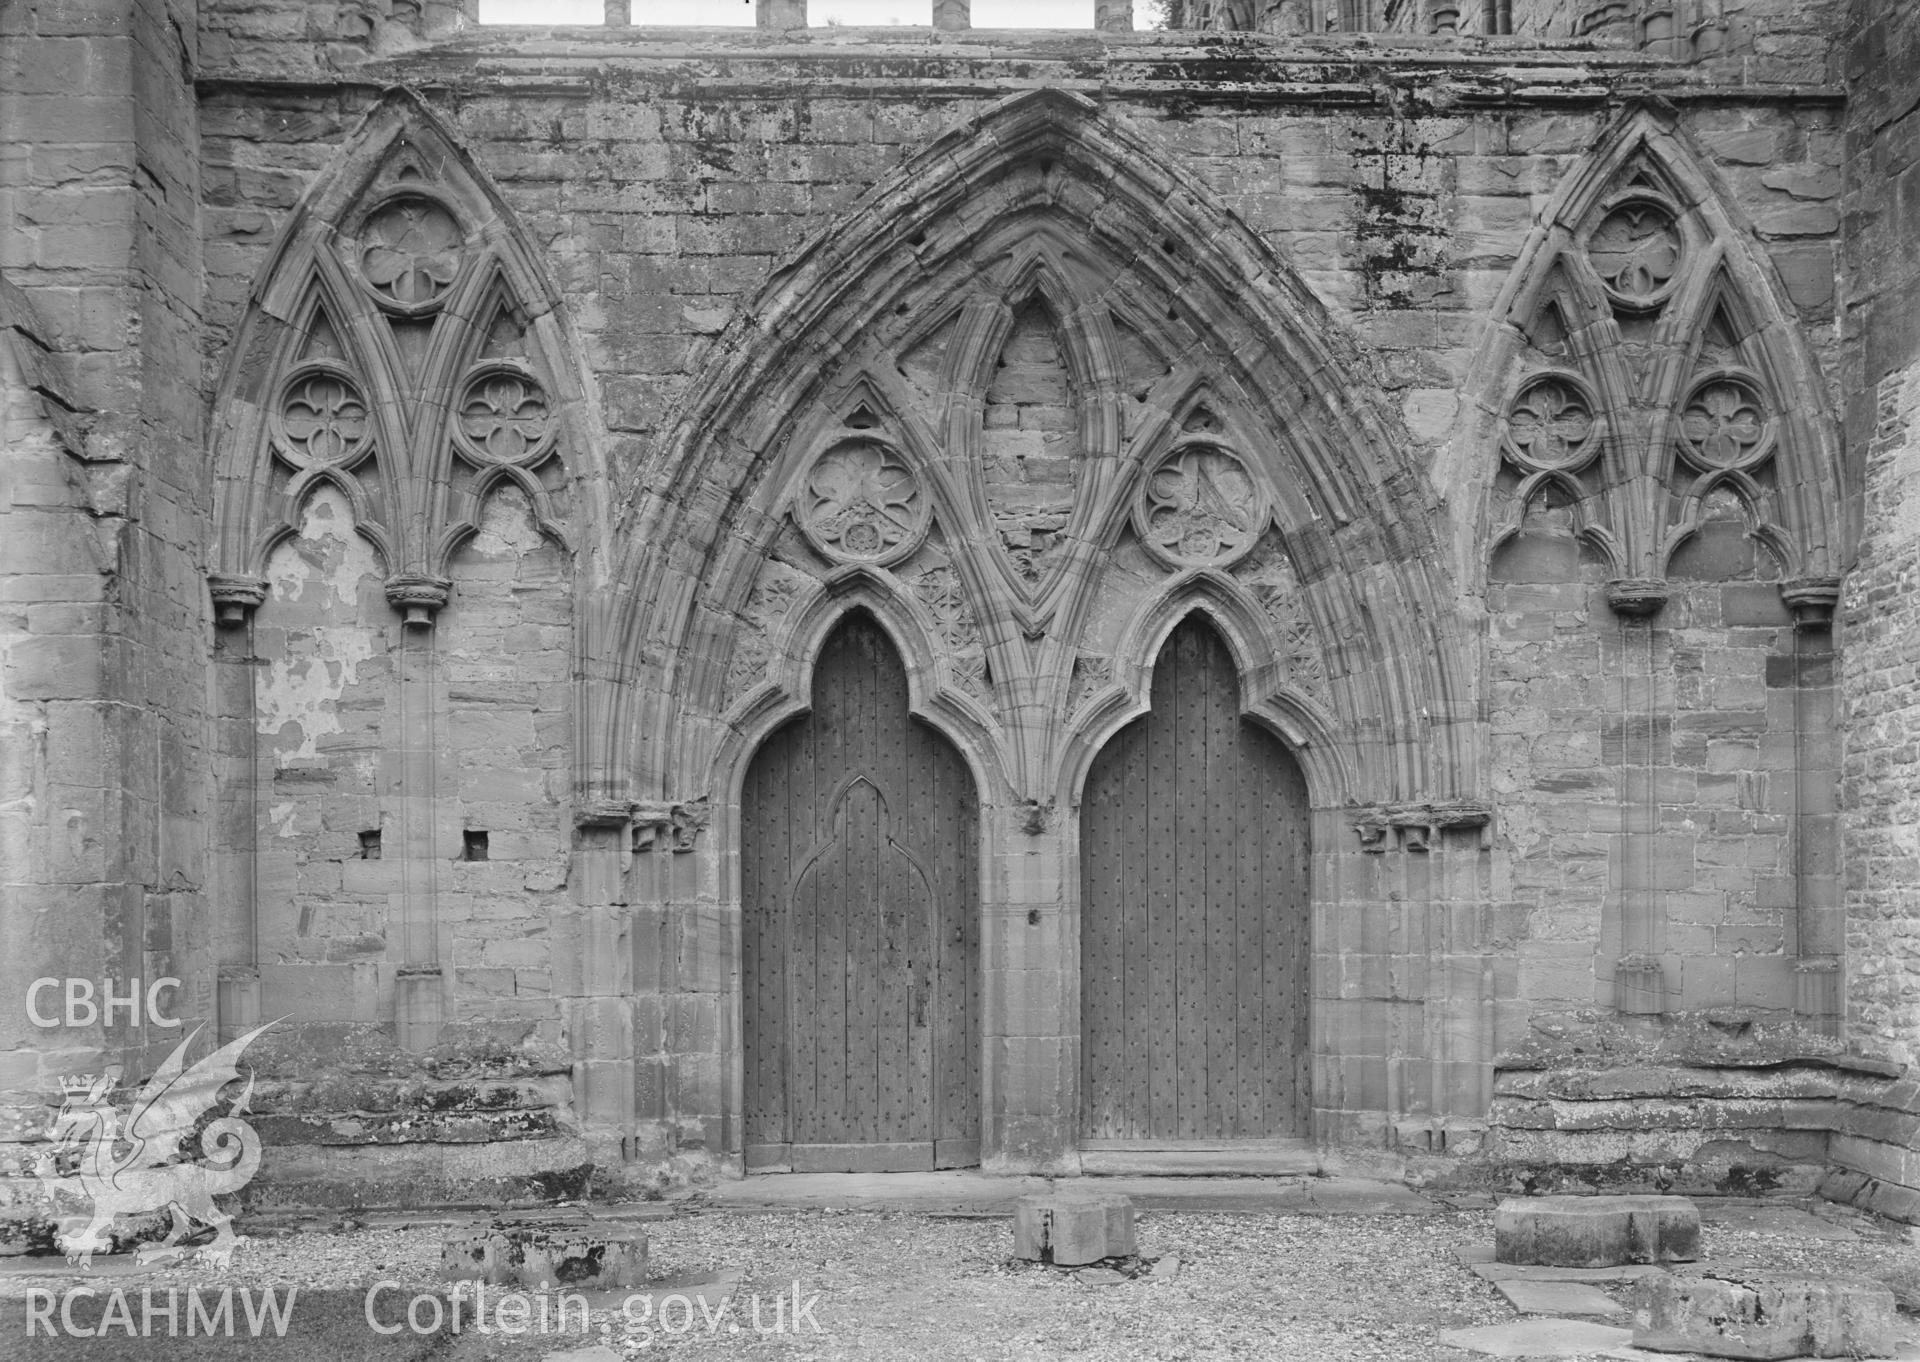 Black and white glass negative showing arches at Tintern Abbey.